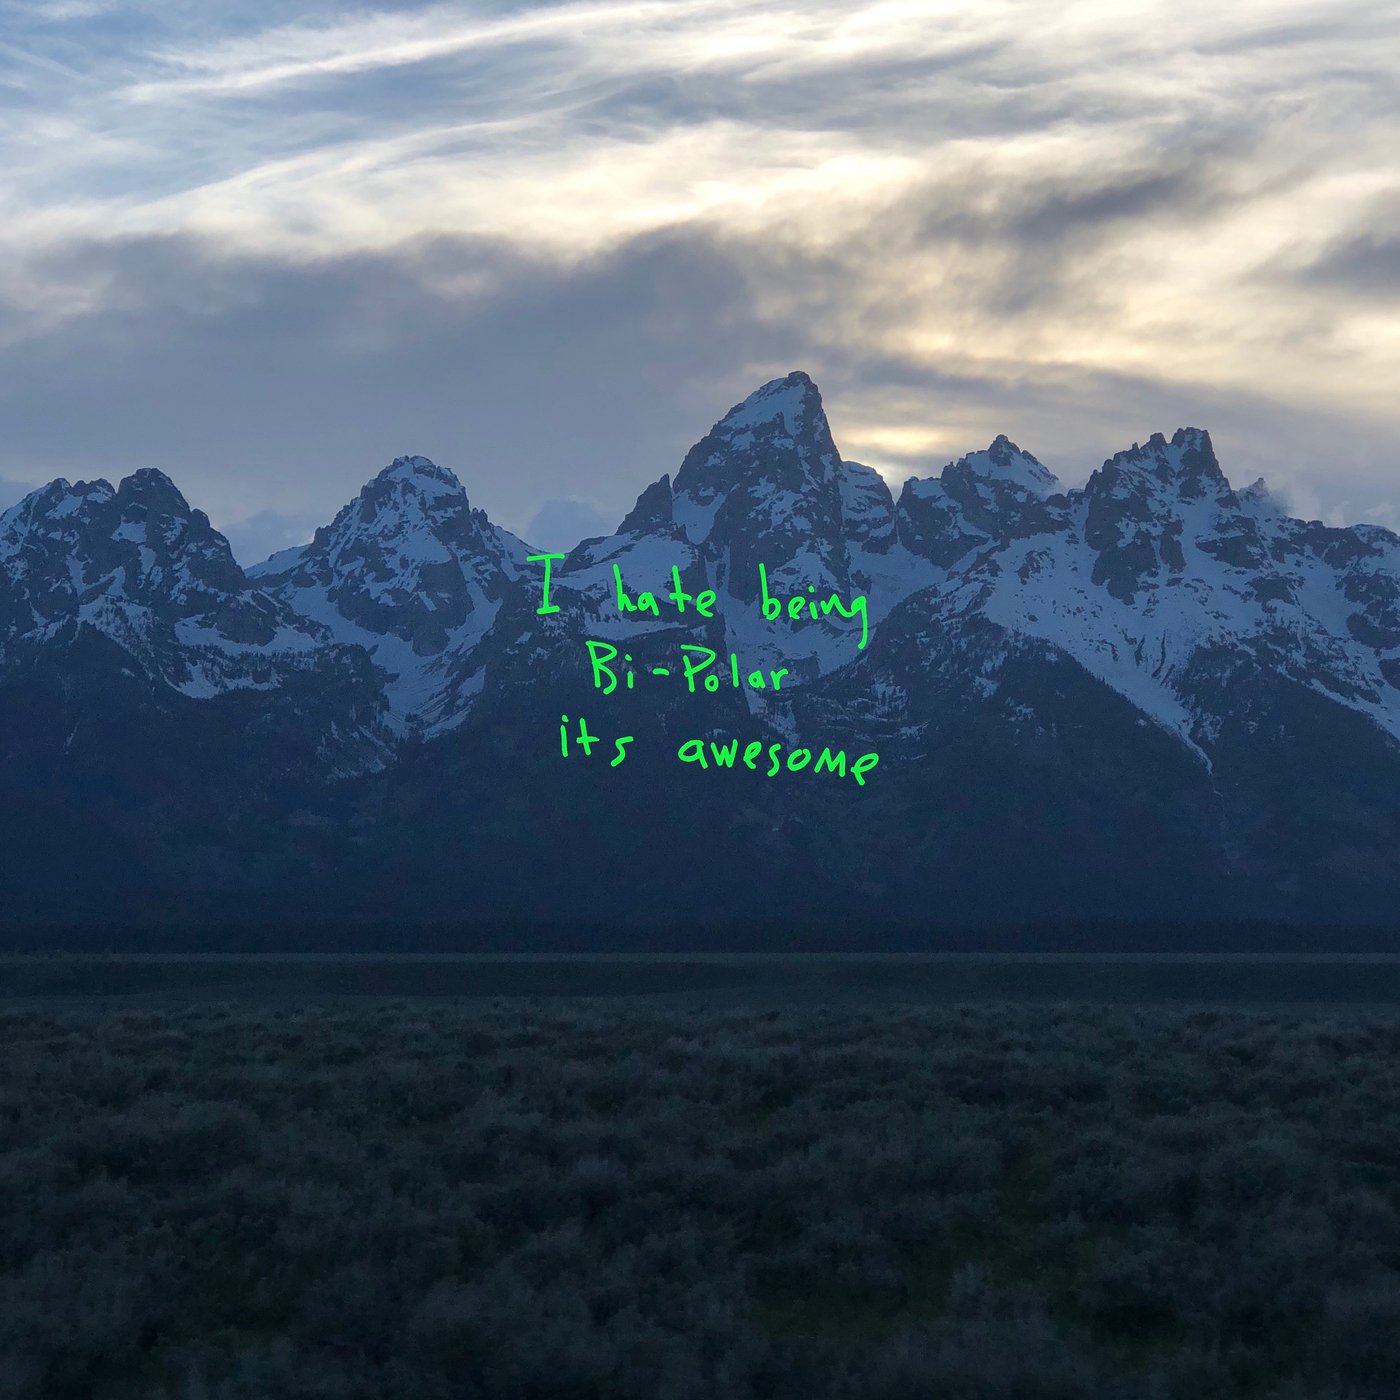 KANYE WEST - I HATE BEING BI-POLAR IT'S AWESOME